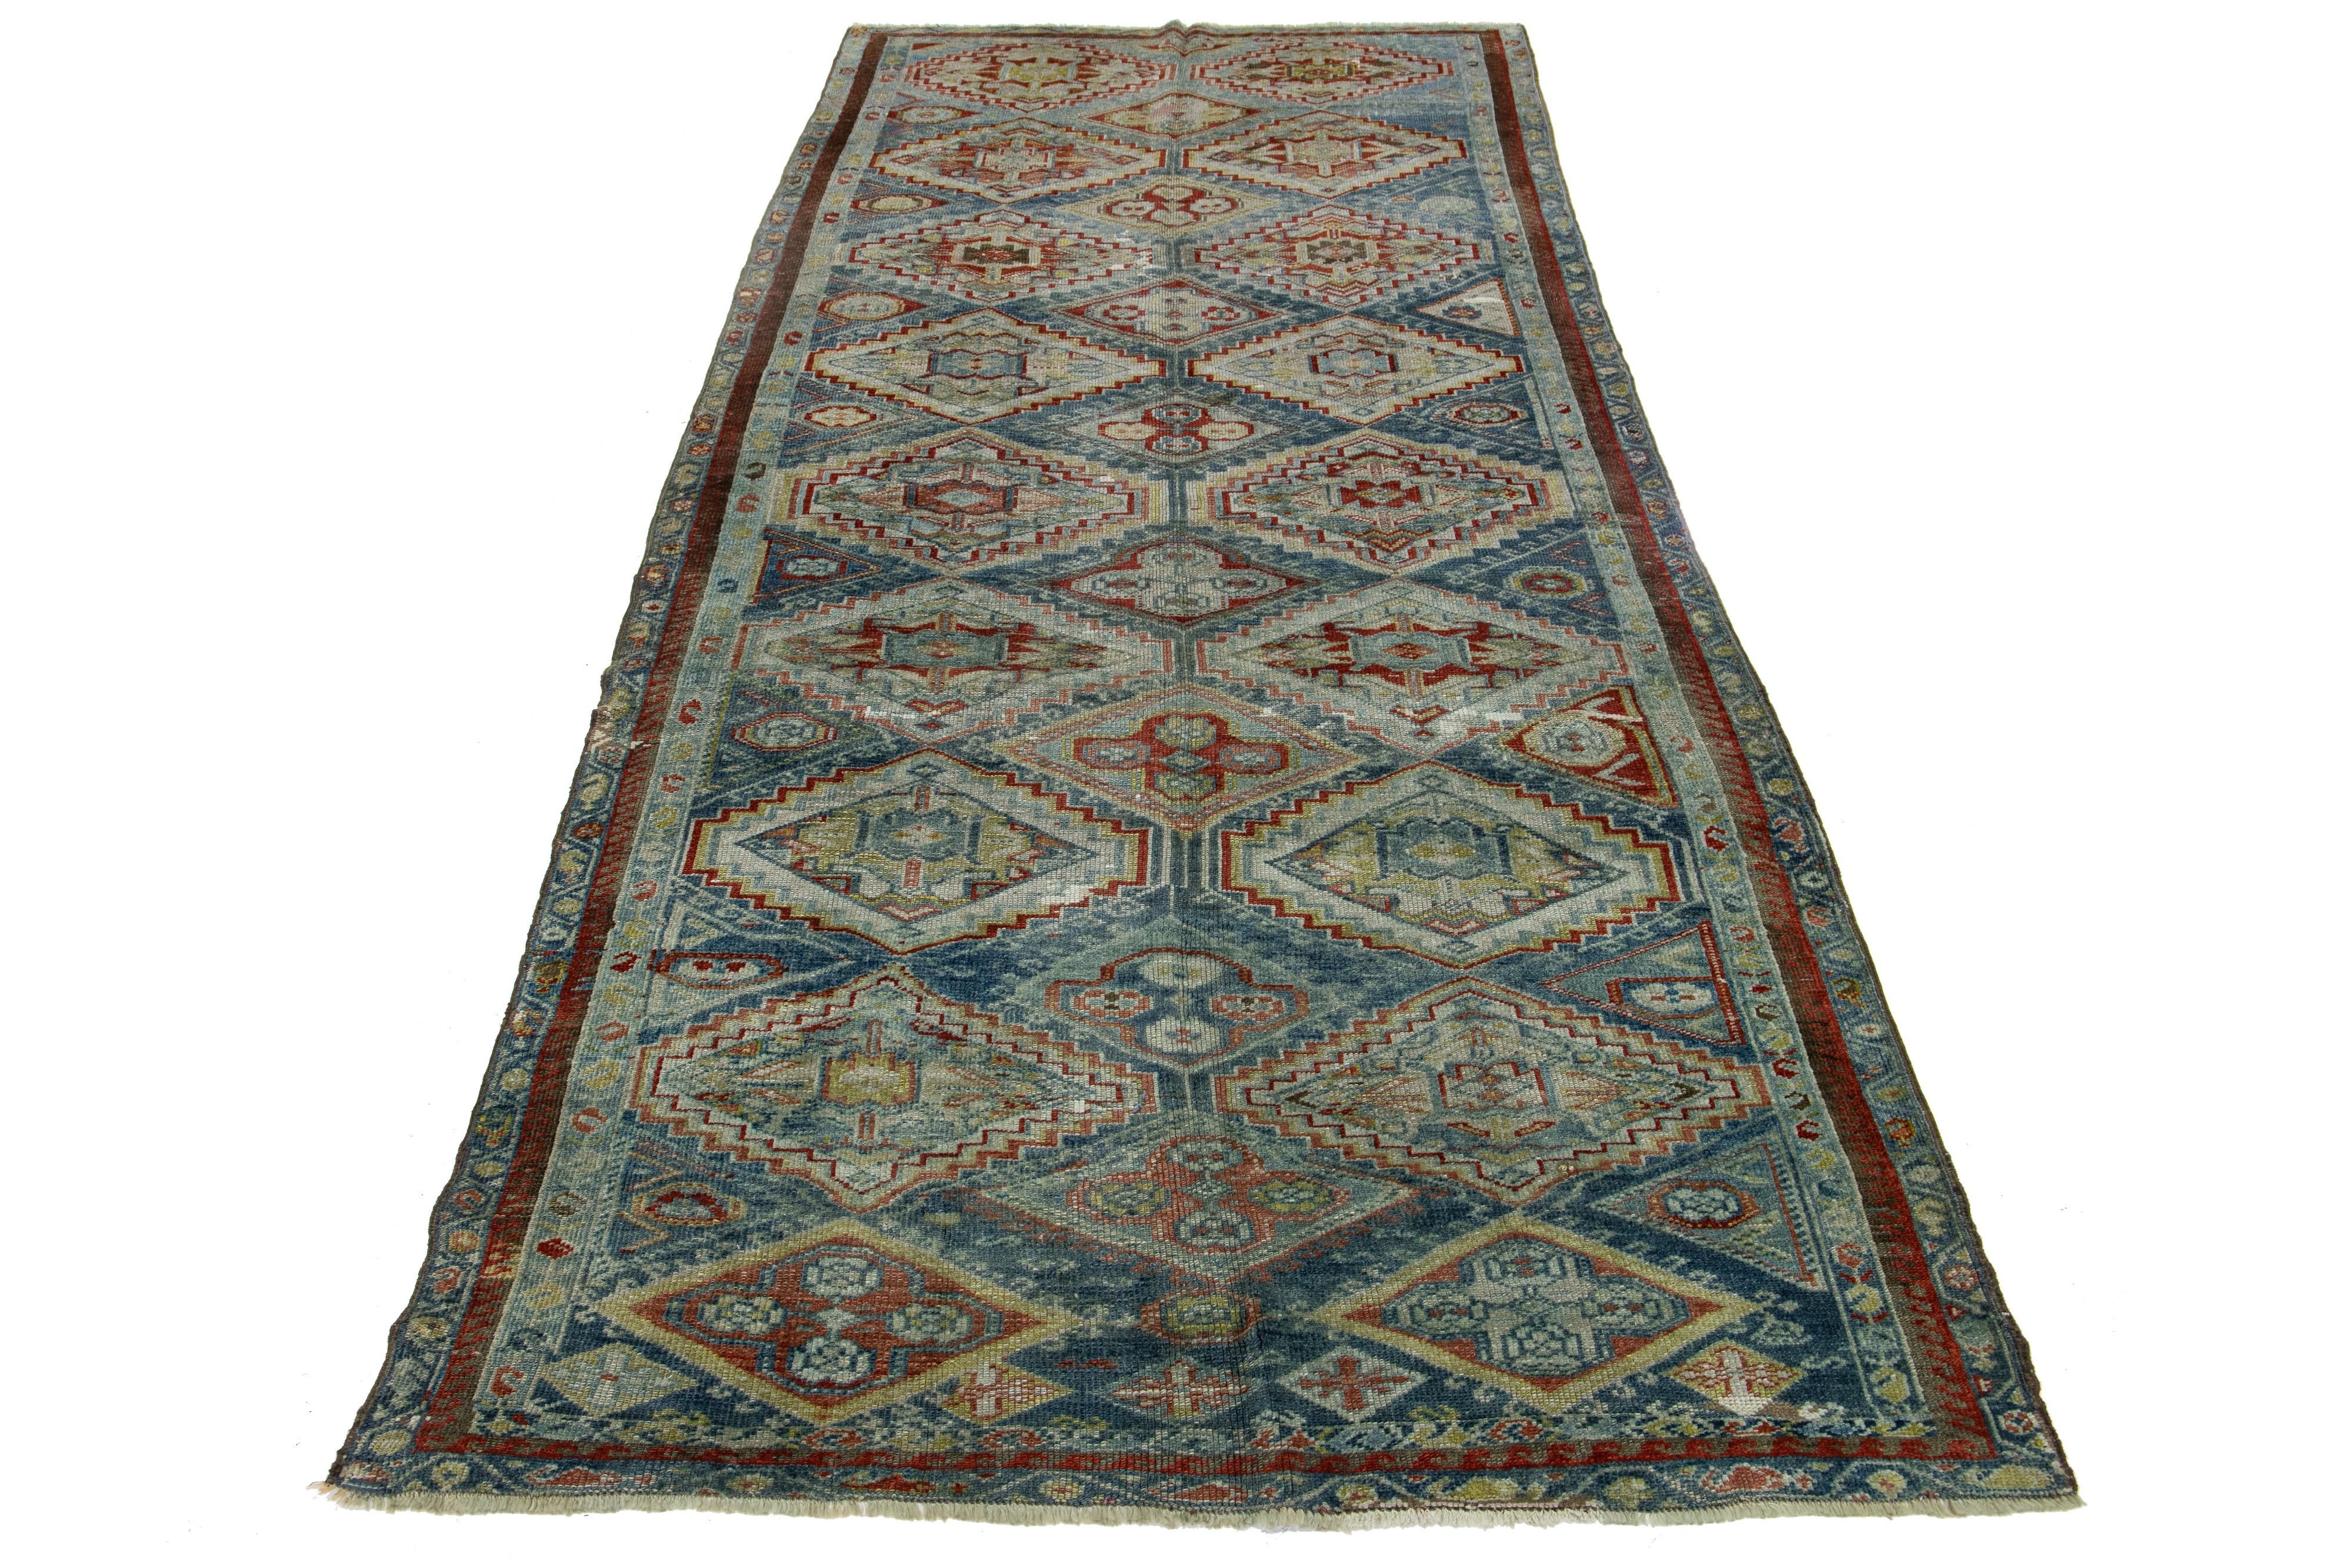 Beautiful antique Persian hand-knotted wool rug with a blue color field. This piece has a red-designed frame with multicolor accents in a gorgeous all-over pattern.

This rug measures 5'2